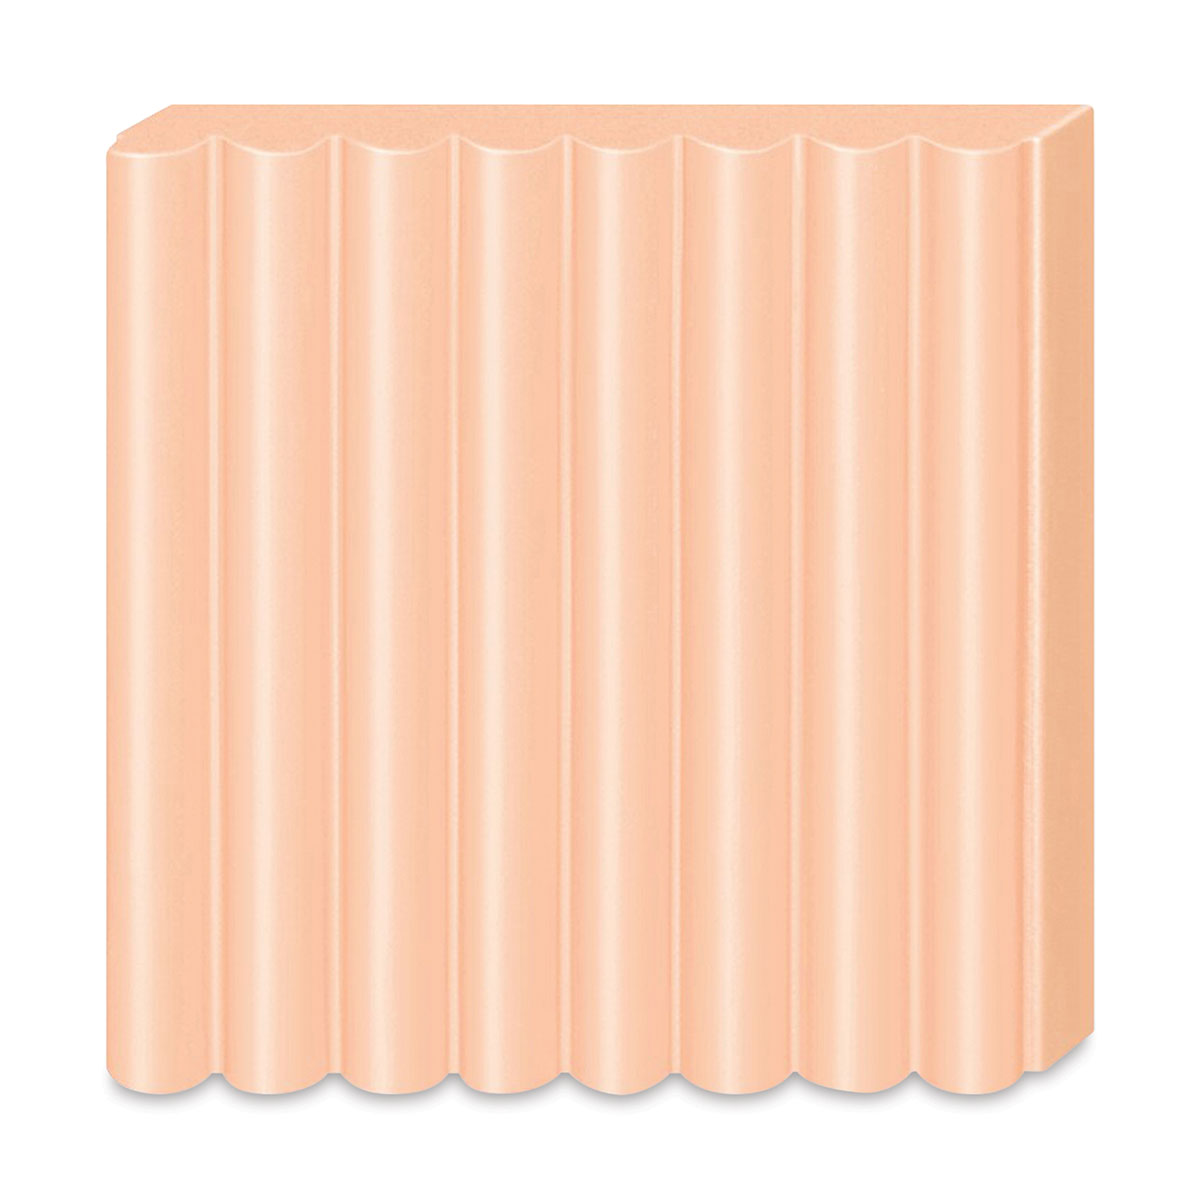 FIMO Effect Polymer Clay (2 oz) - LIGHT PINK – The Clay Republic